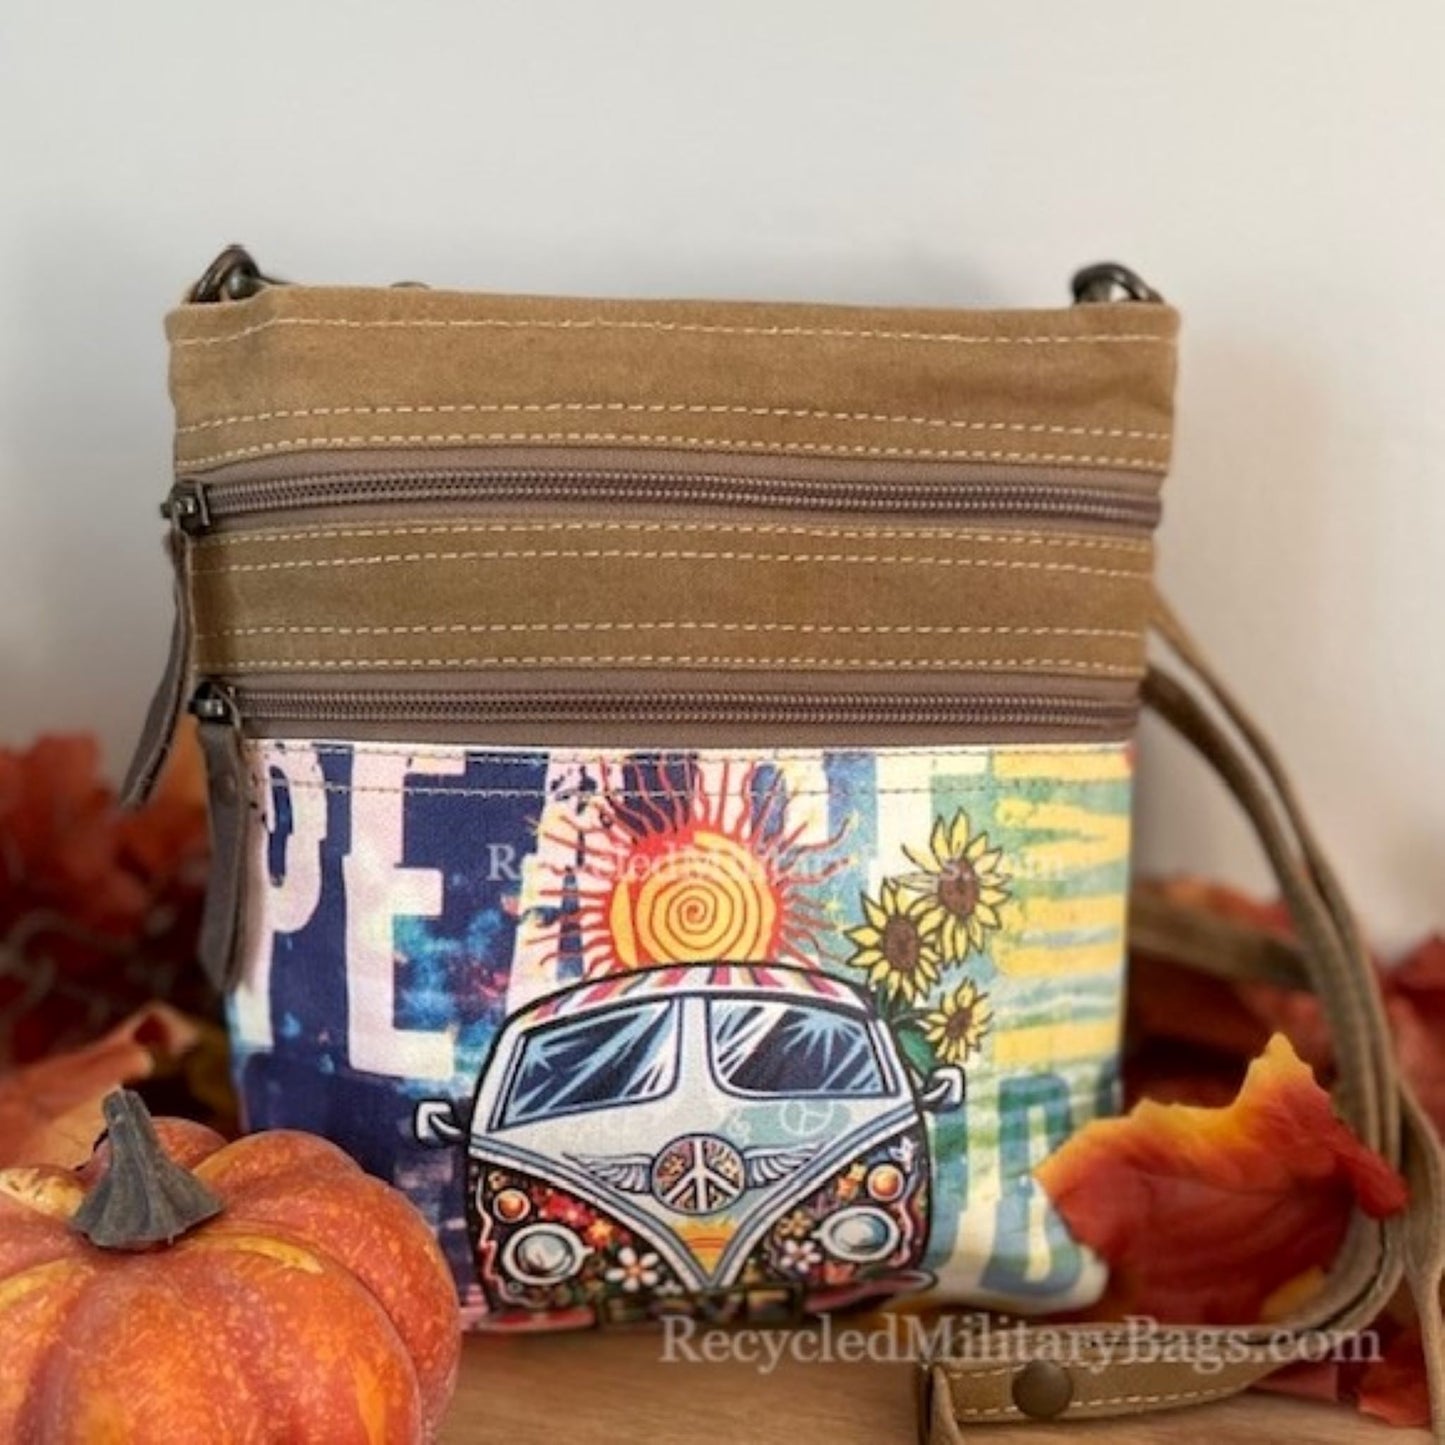 New! Vintage Hippie Van Small Canvas Bag Crossbody Purse ~ Peace with a Little Sunshine and Flower Power!